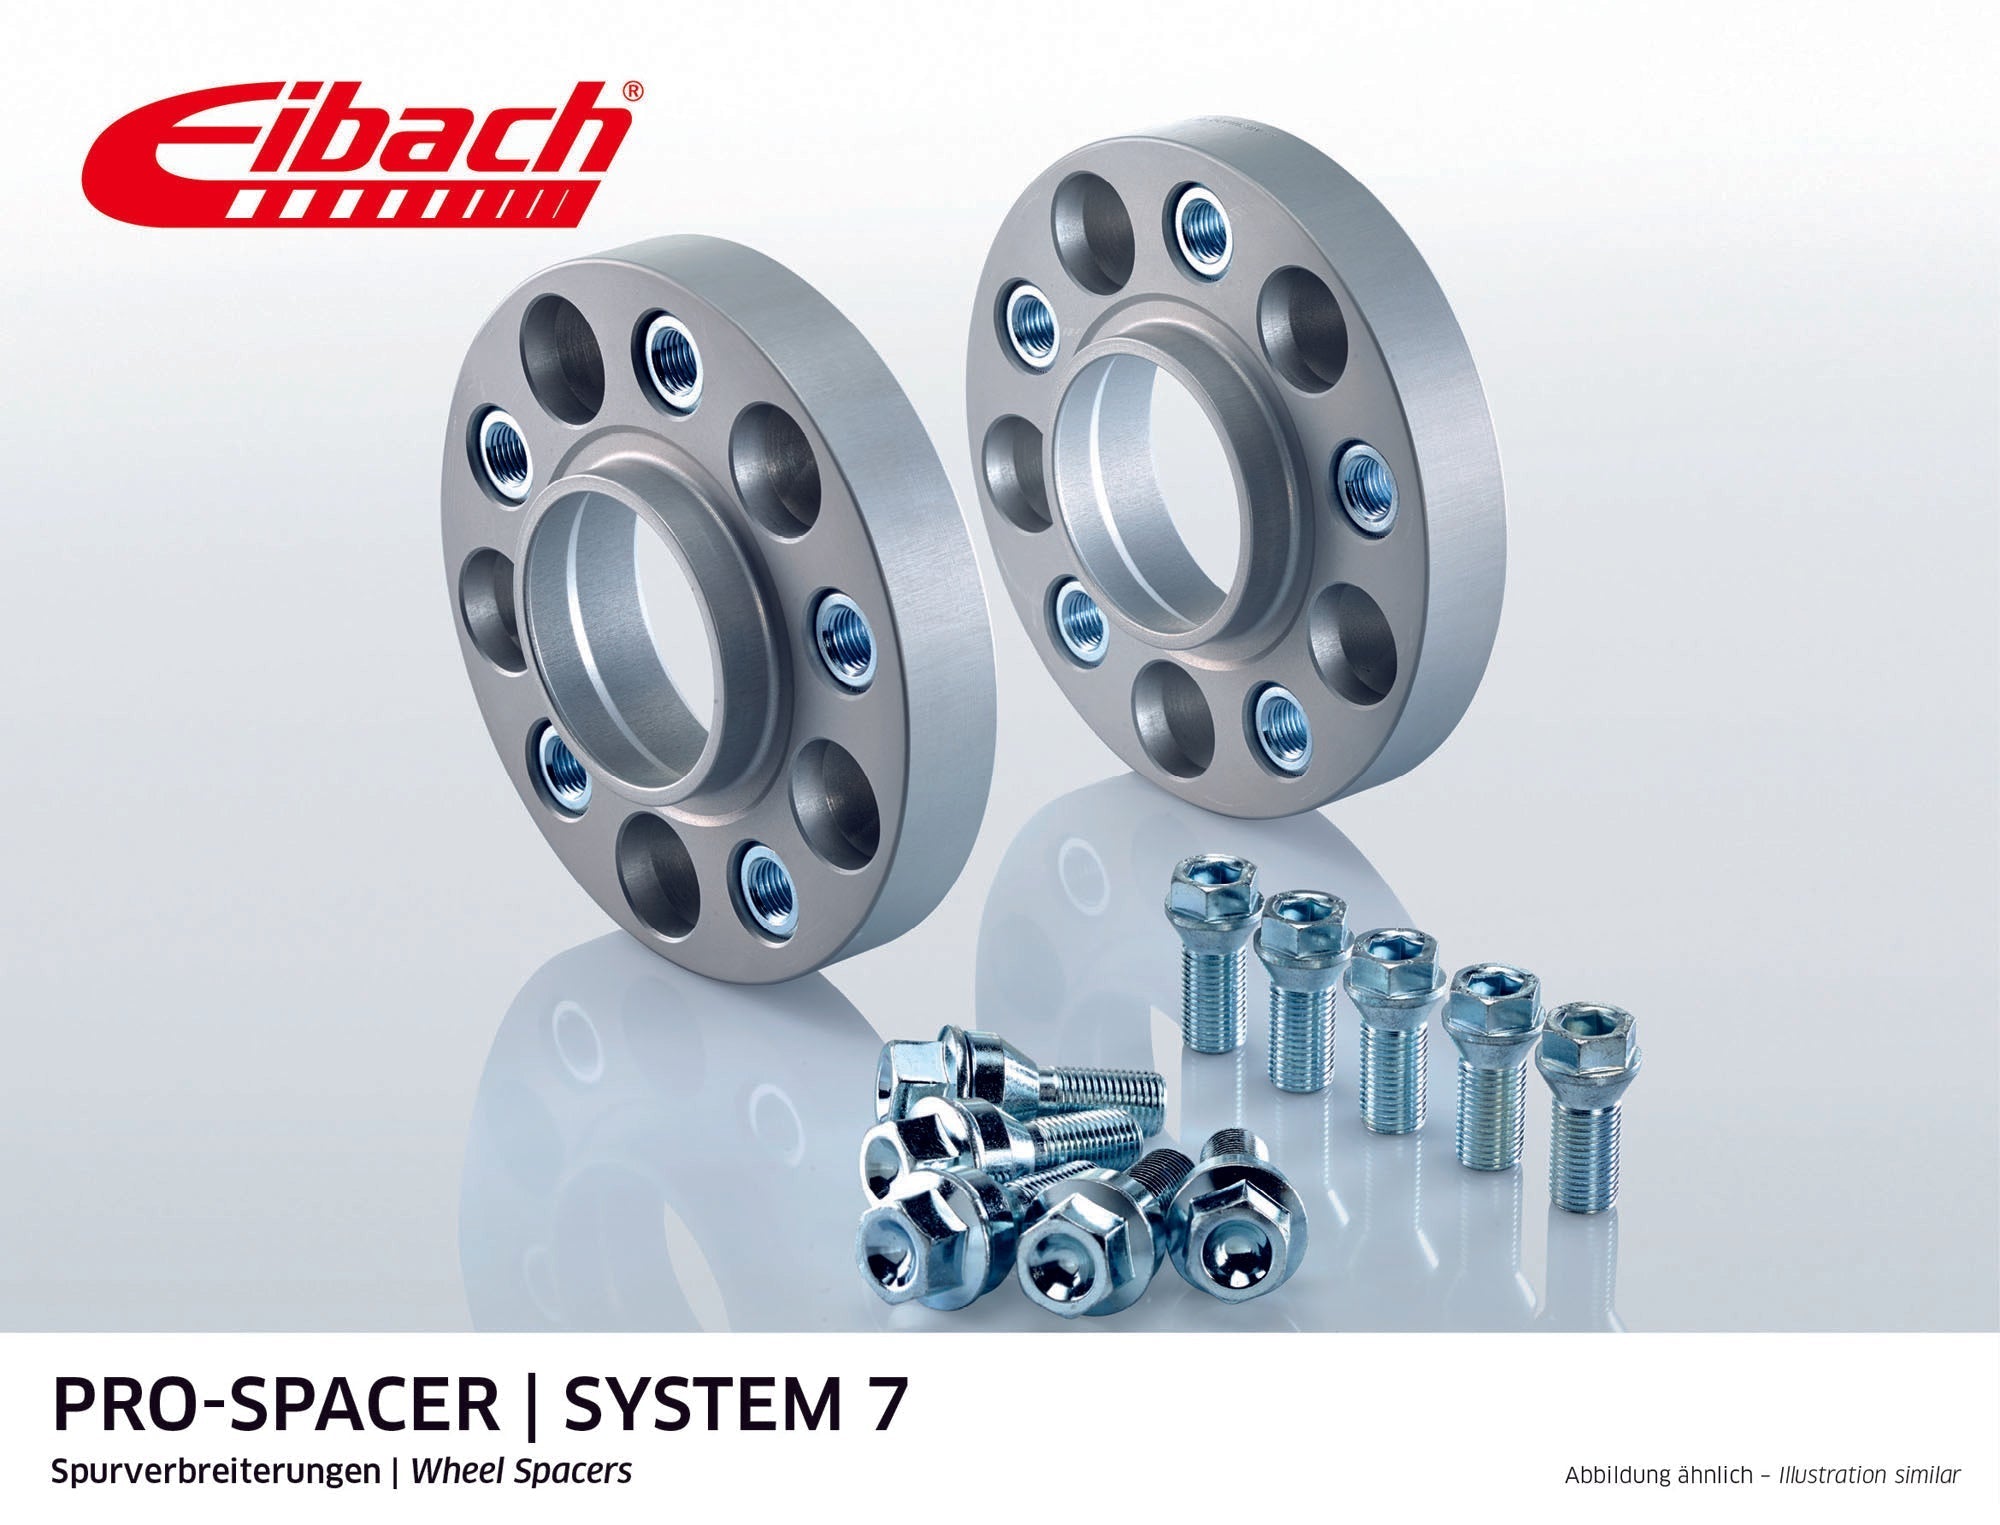 Eibach 18mm Pro-Spacer - Silver Anodized Wheel Spacer 911 2004-12 #S90-7-18-001